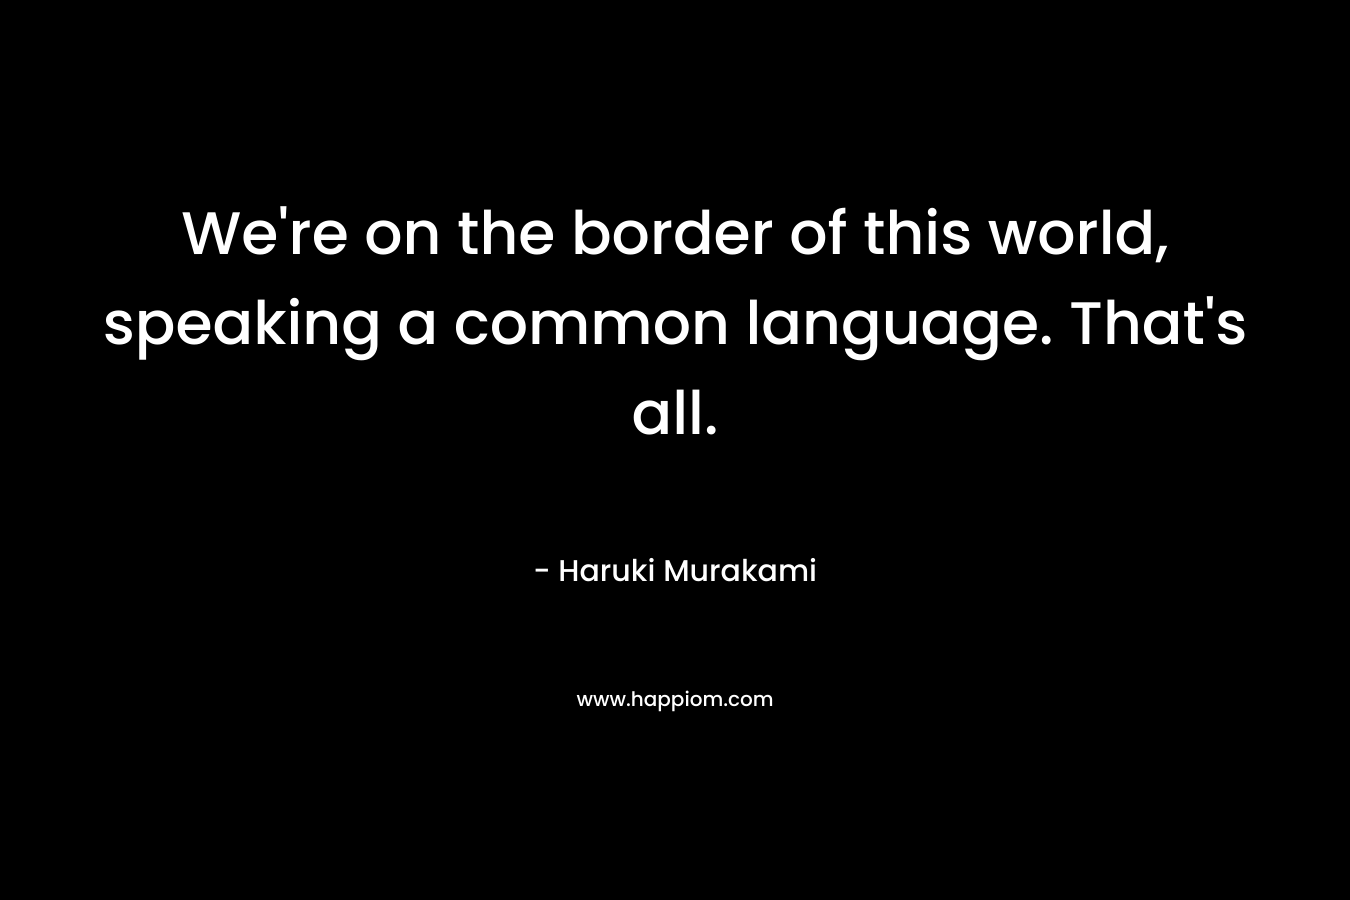 We’re on the border of this world, speaking a common language. That’s all. – Haruki Murakami